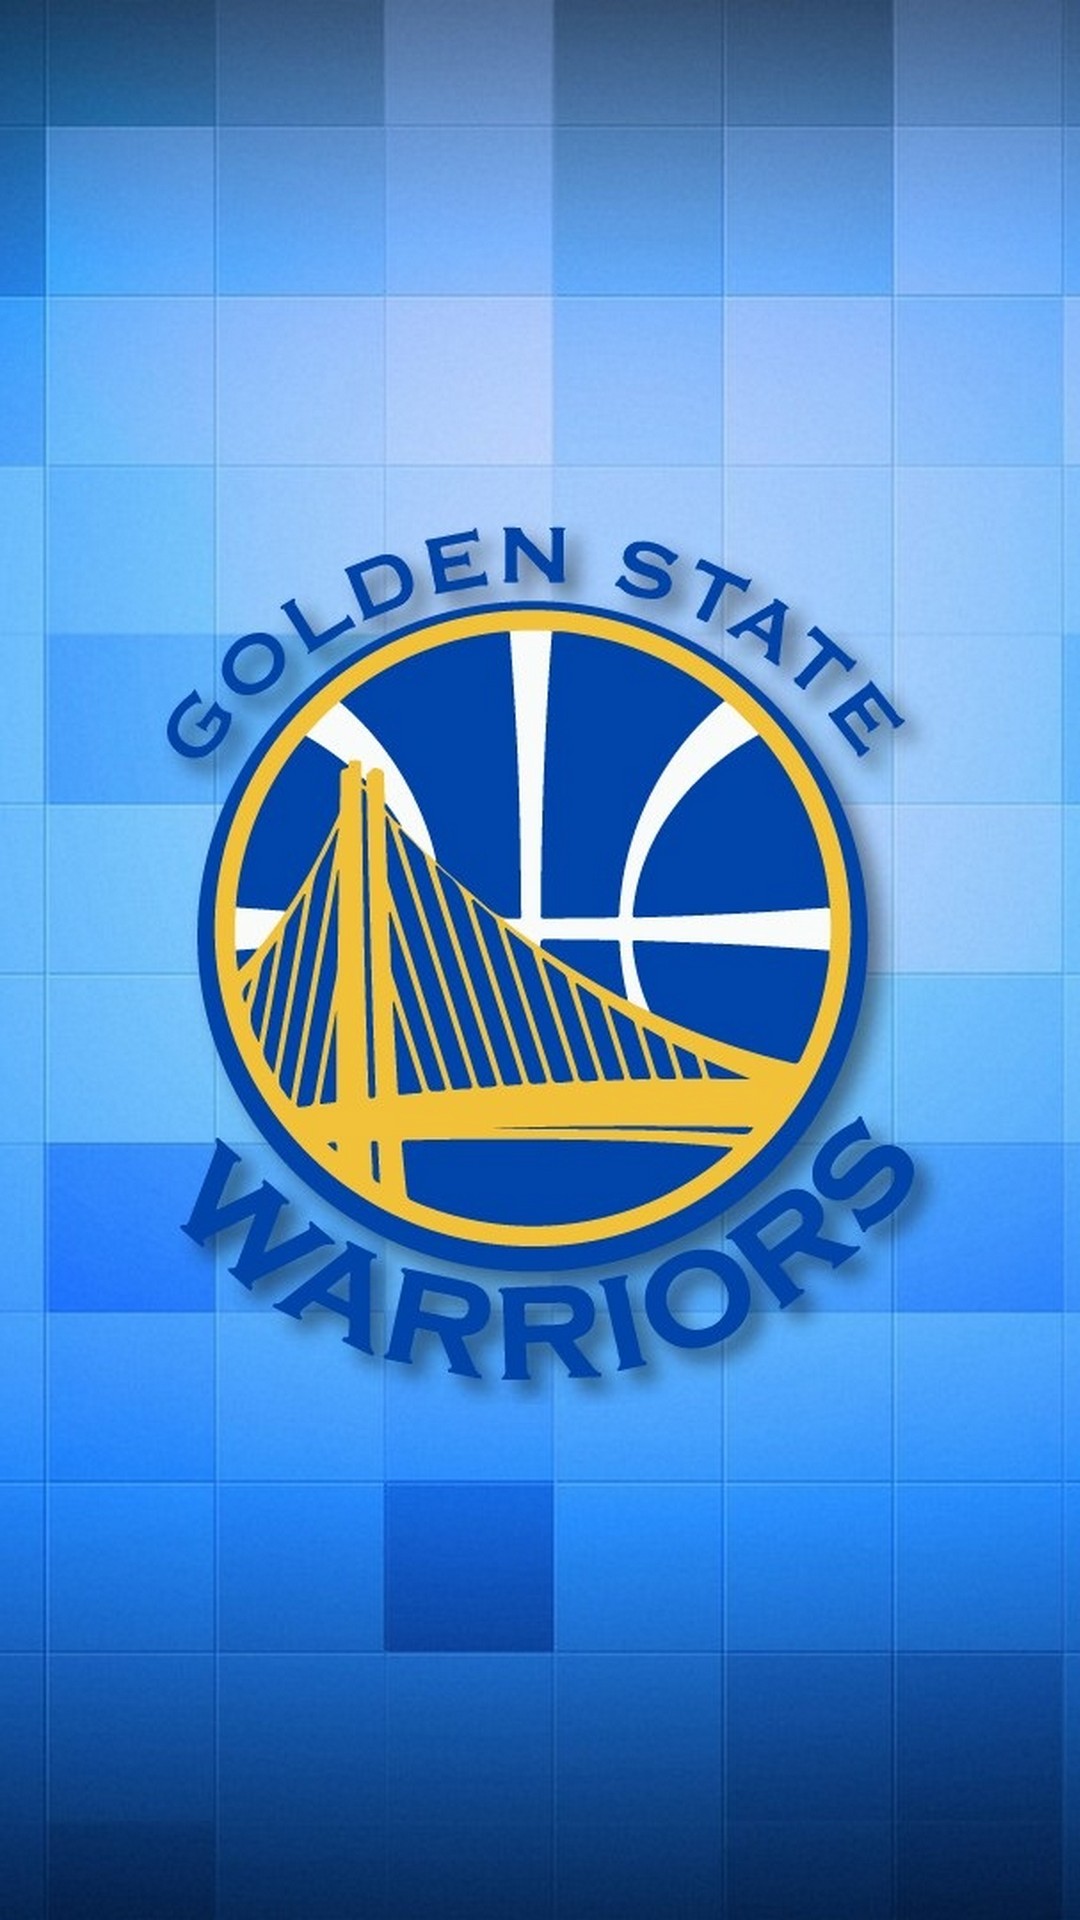 Golden State Warriors Wallpaper Android with resolution 1080X1920 pixel. You can make this wallpaper for your Android backgrounds, Tablet, Smartphones Screensavers and Mobile Phone Lock Screen